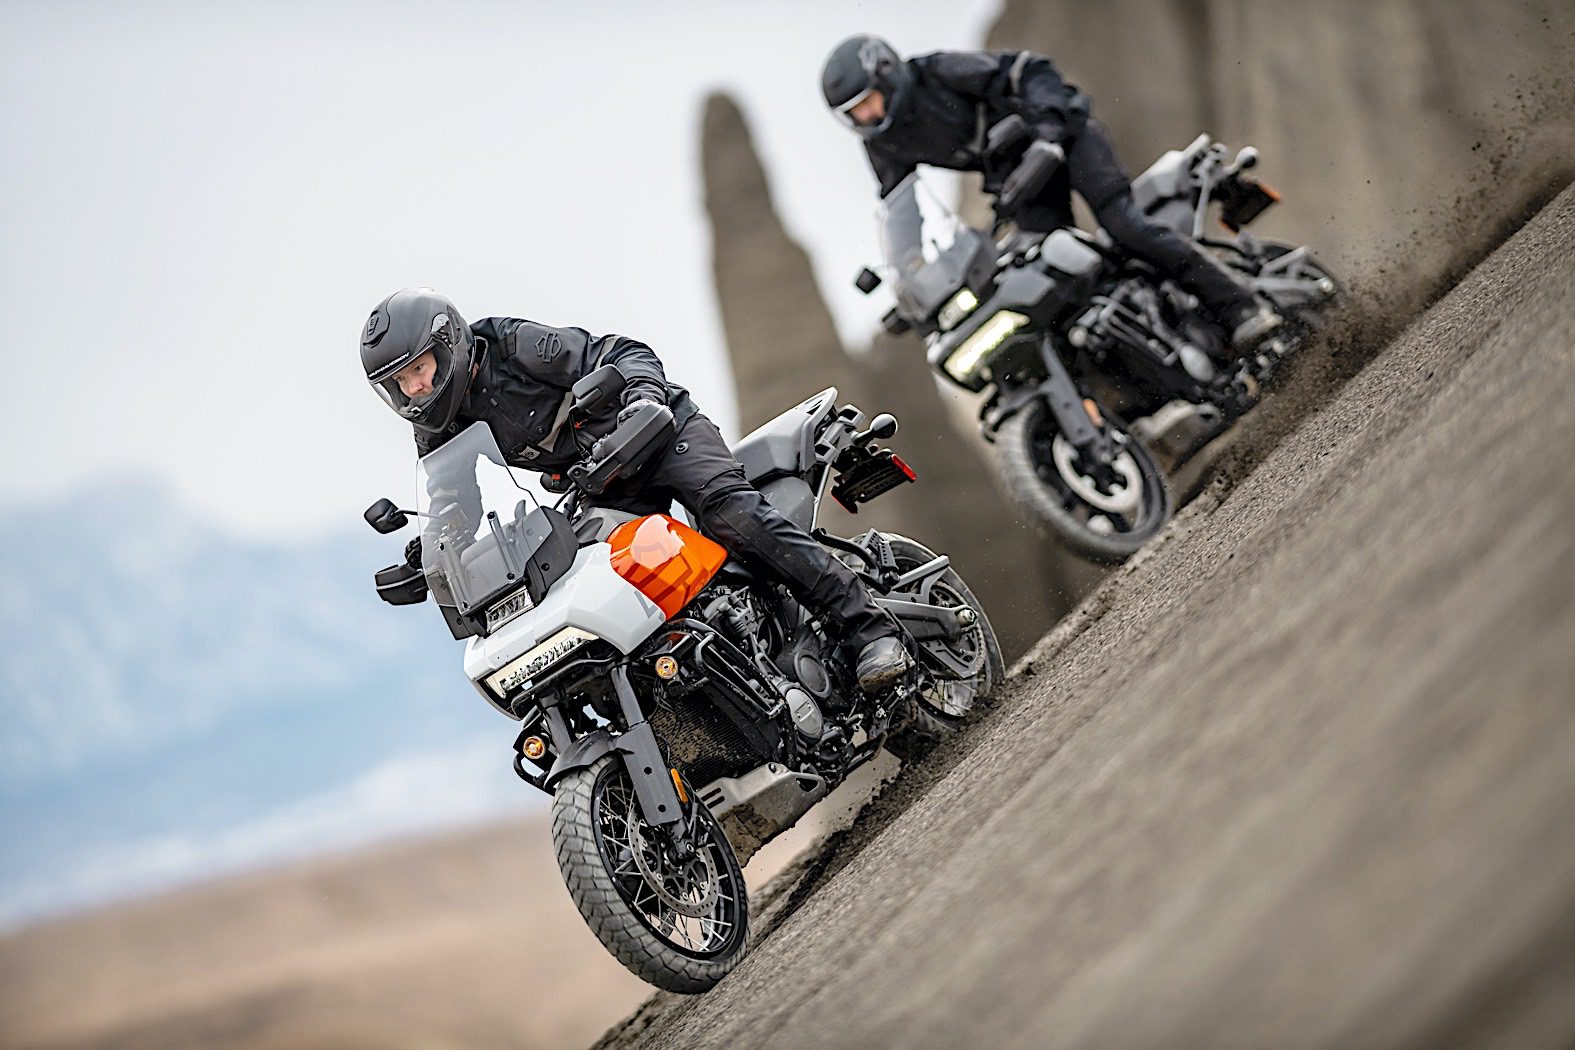 A view of two riders enjoying the all-new Harley Davidson Pan America